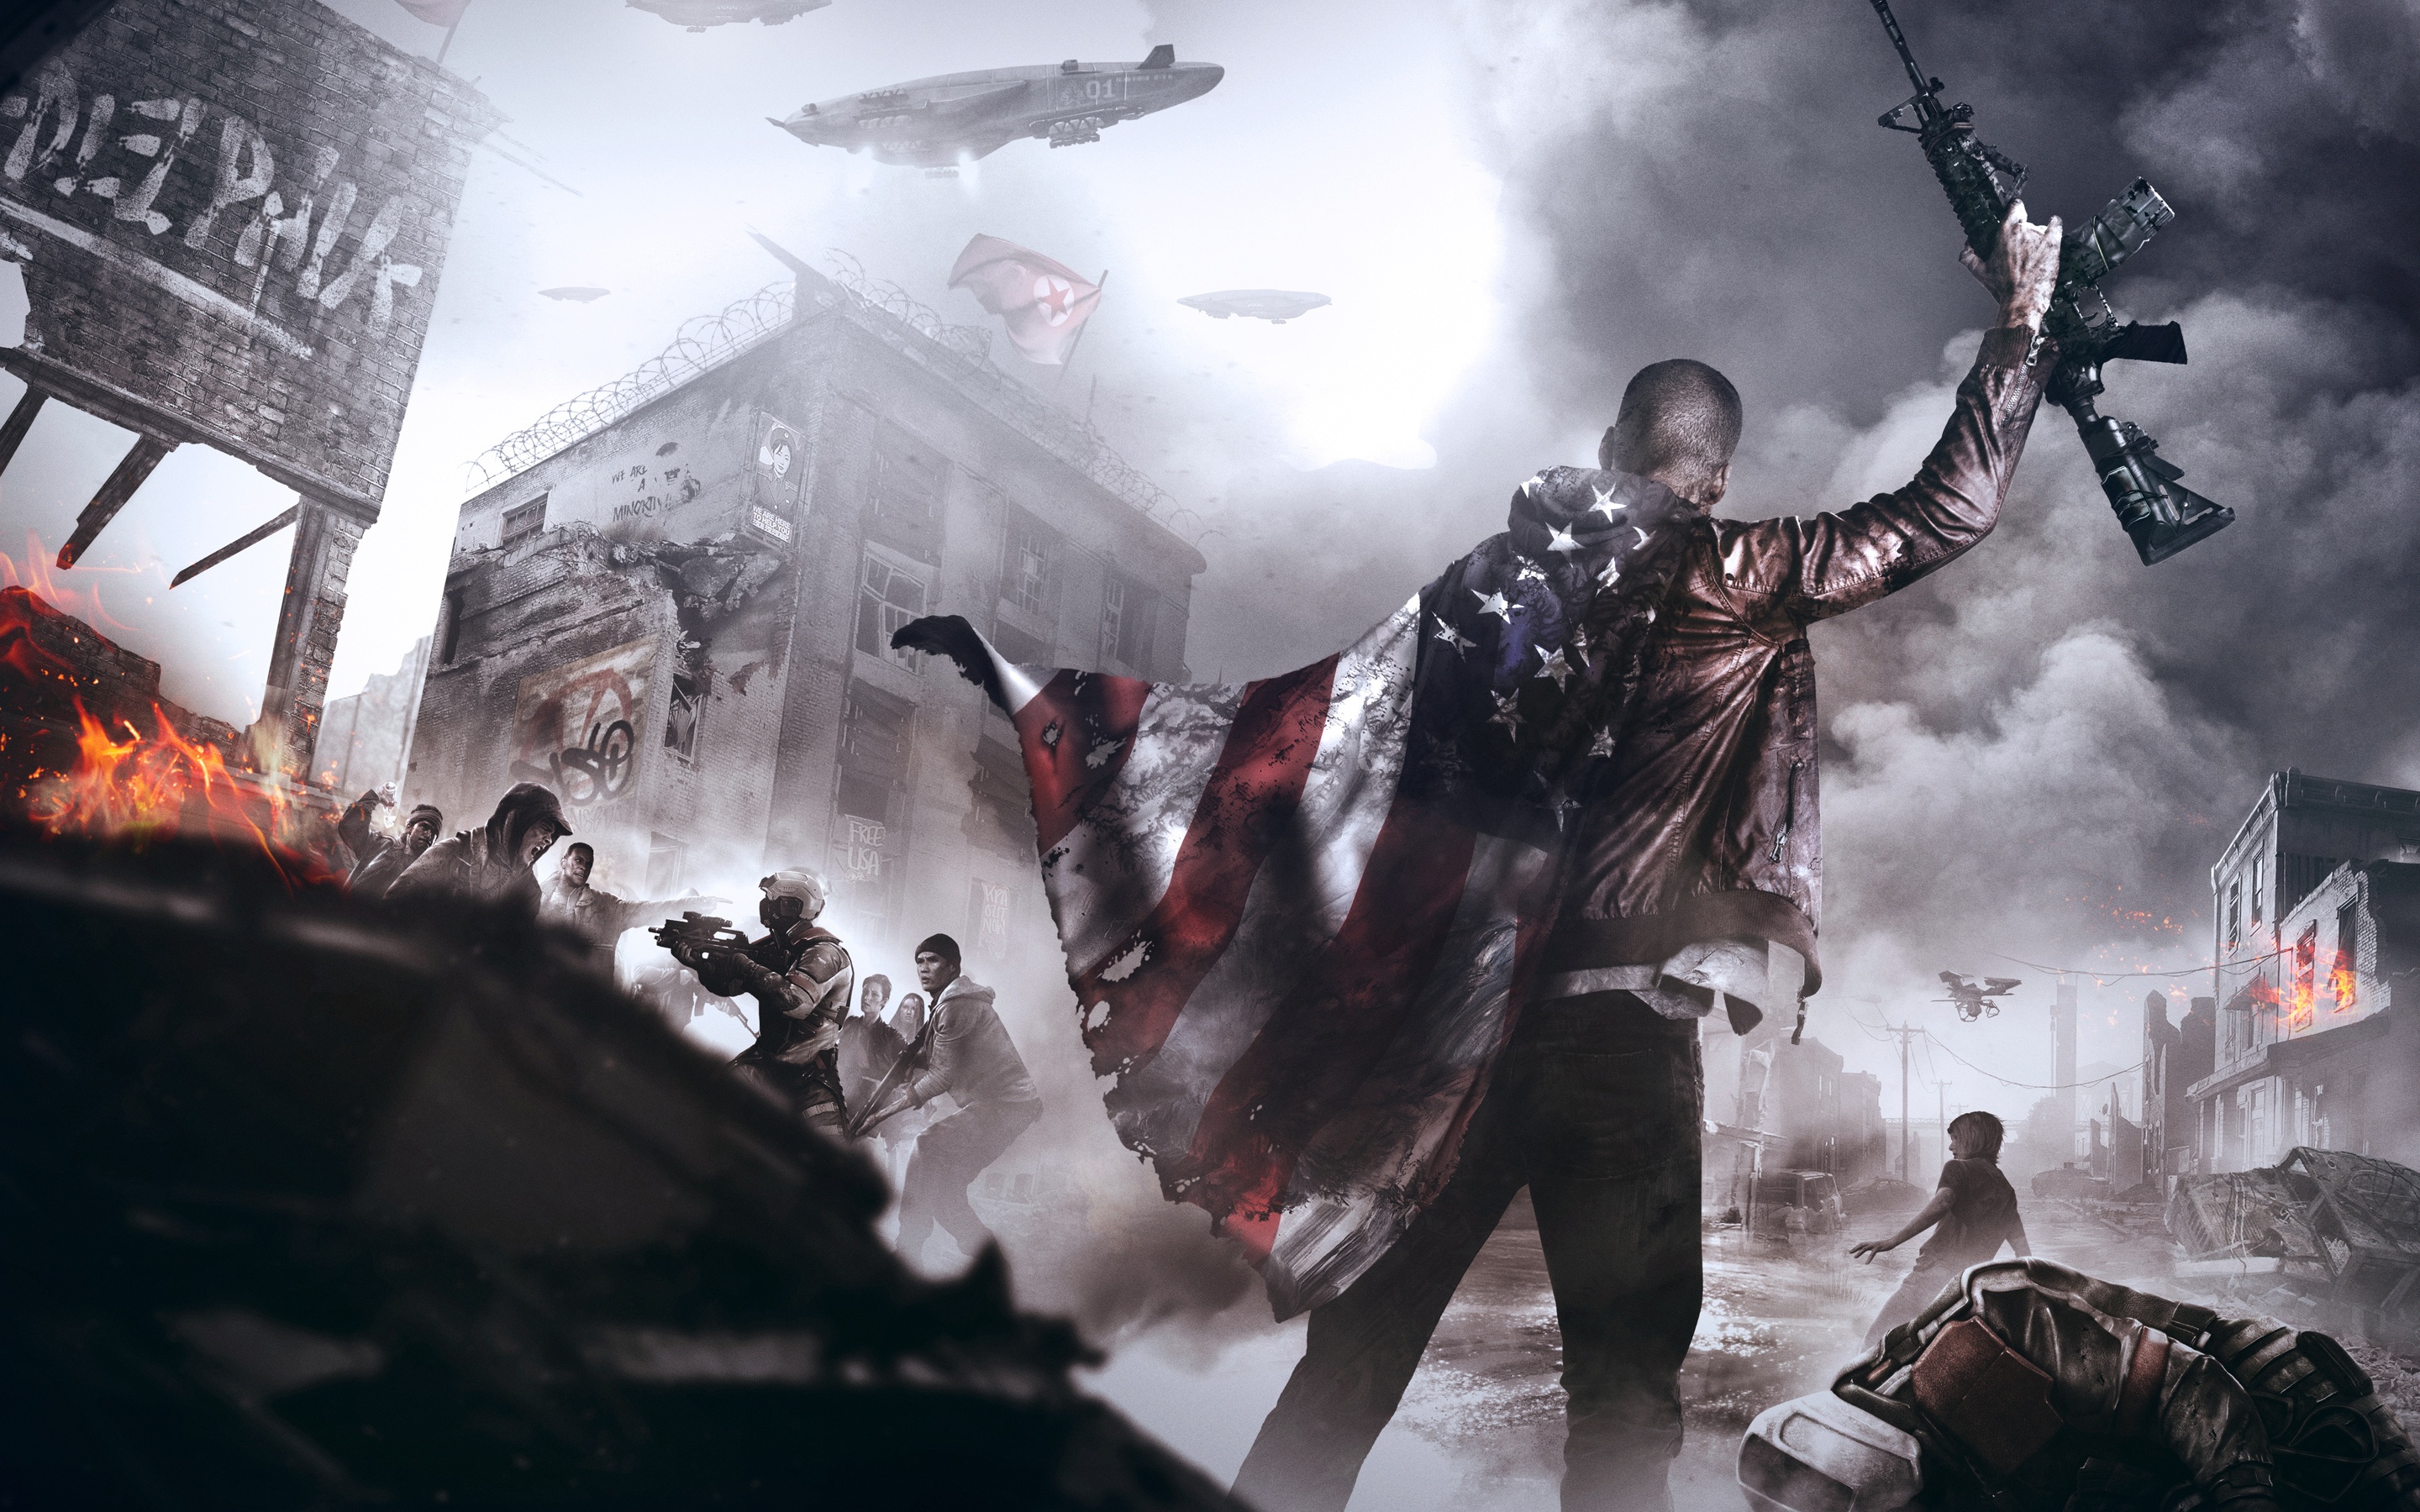 Homefront The Revolution 2016 Wallpaper in jpg format for free download